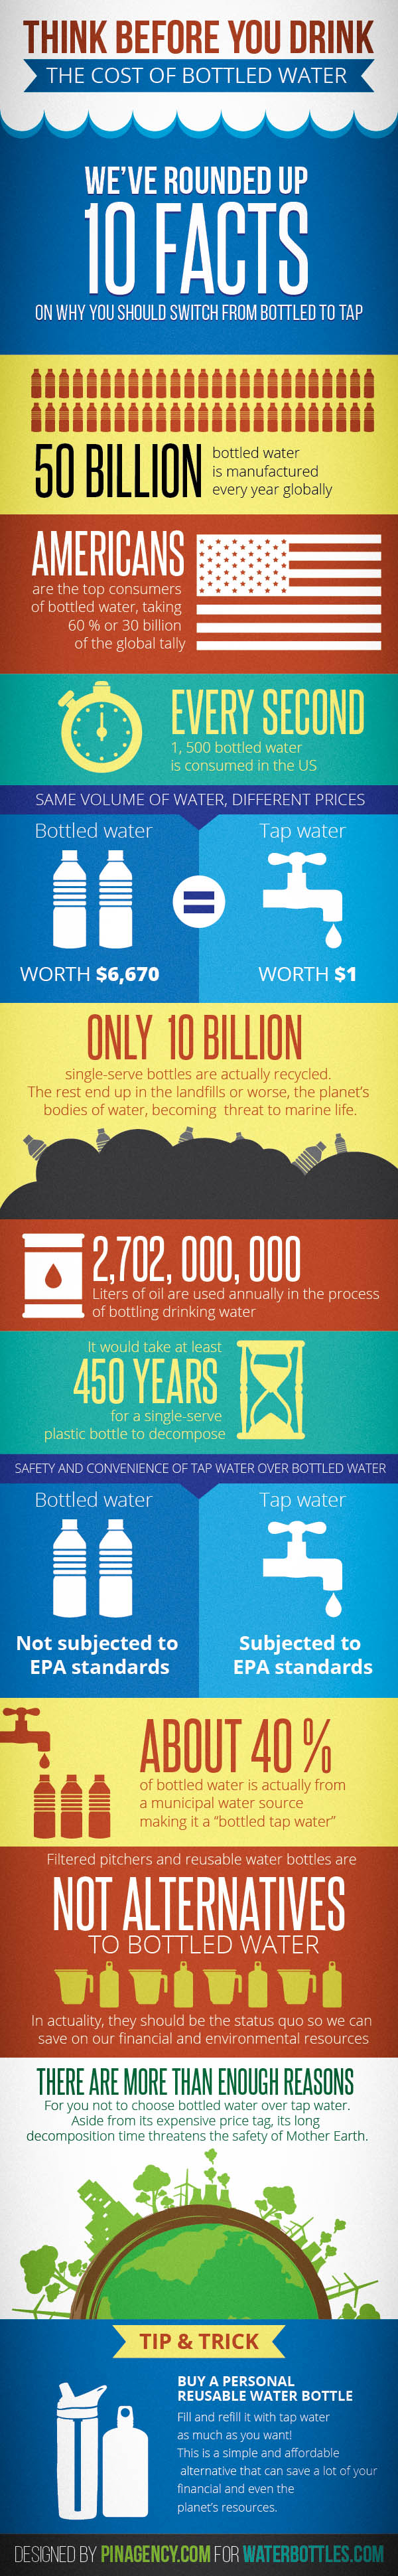 Think Before You Drink: The Costs of Bottled Water